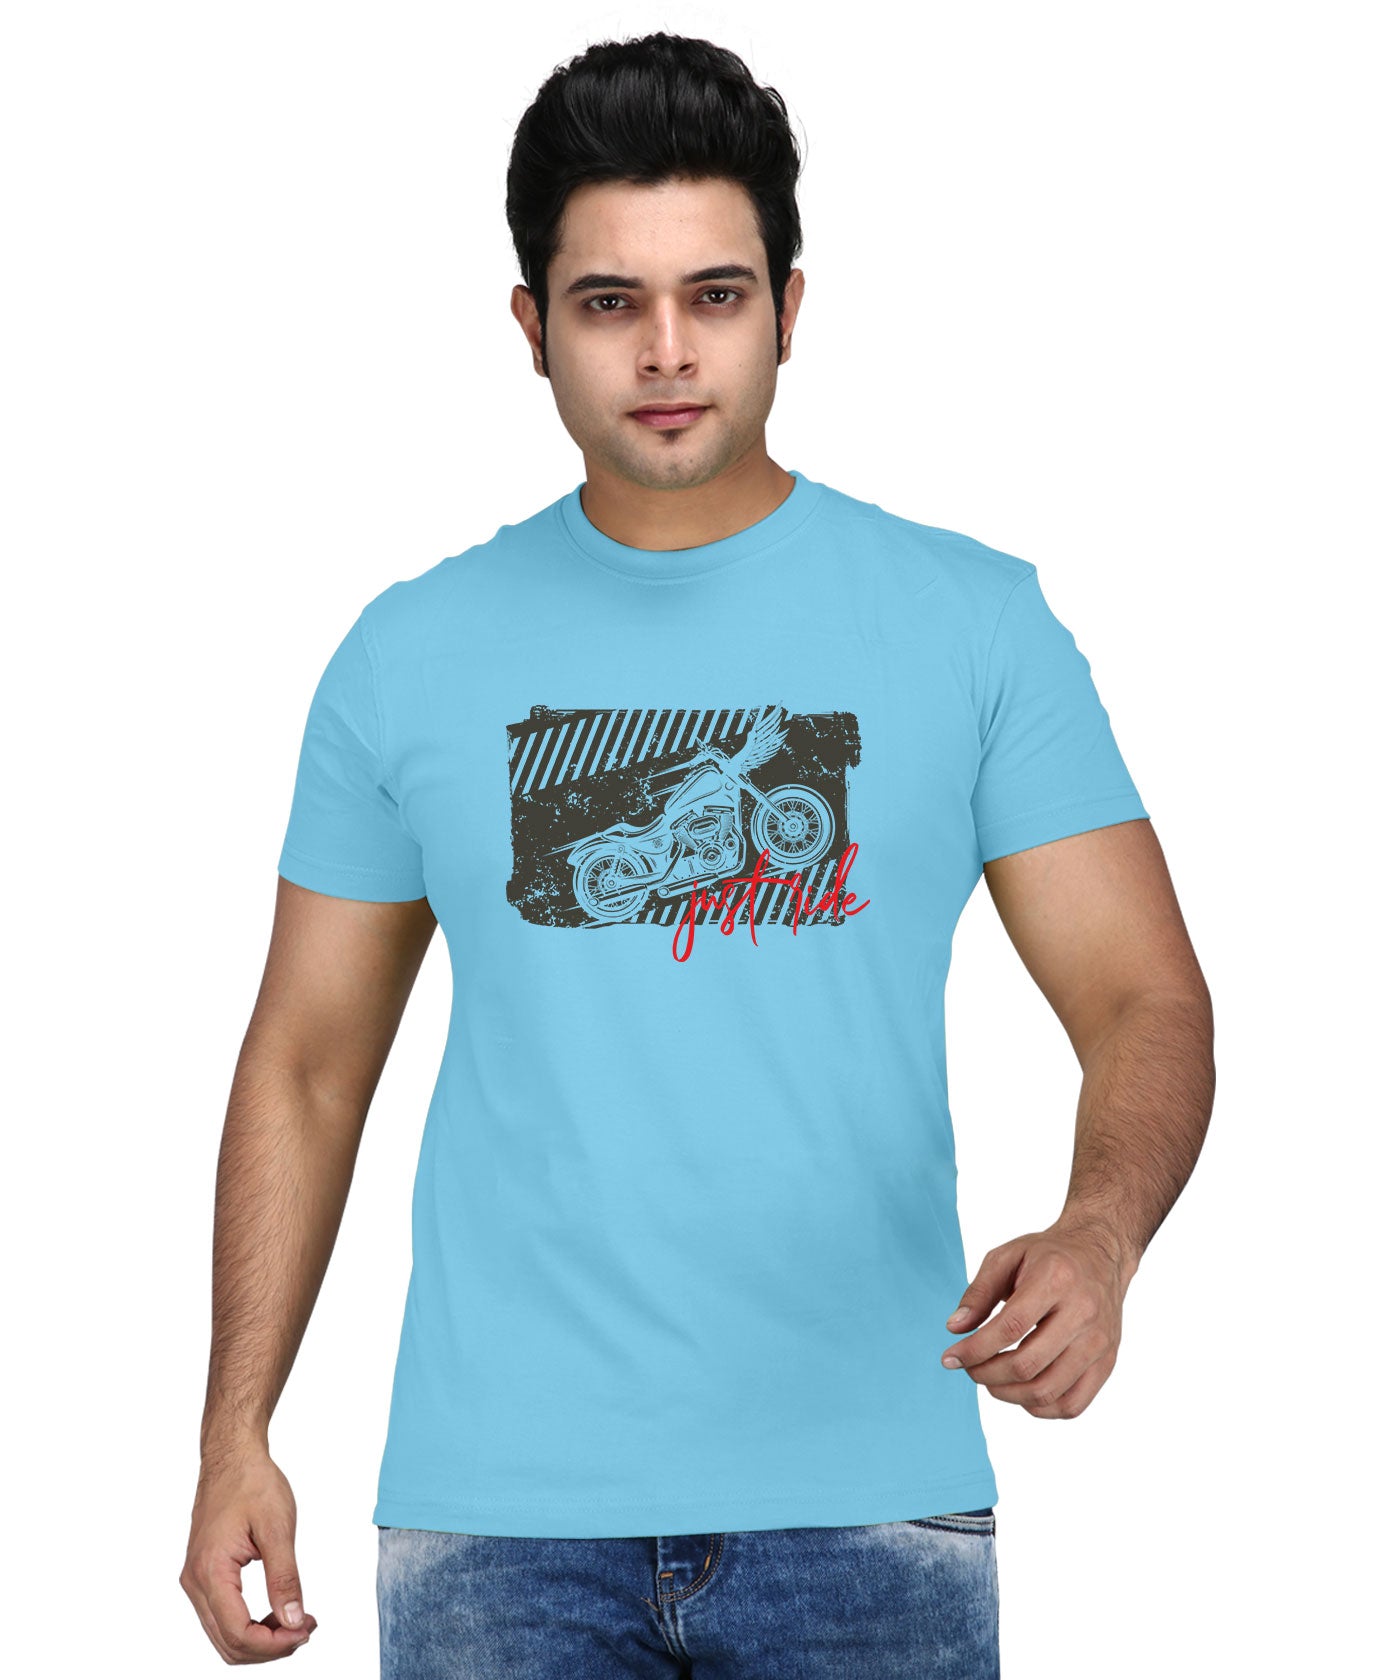 Just Ride - Premium Round Neck Cotton Tees for Men - Sky Blue And White Melange